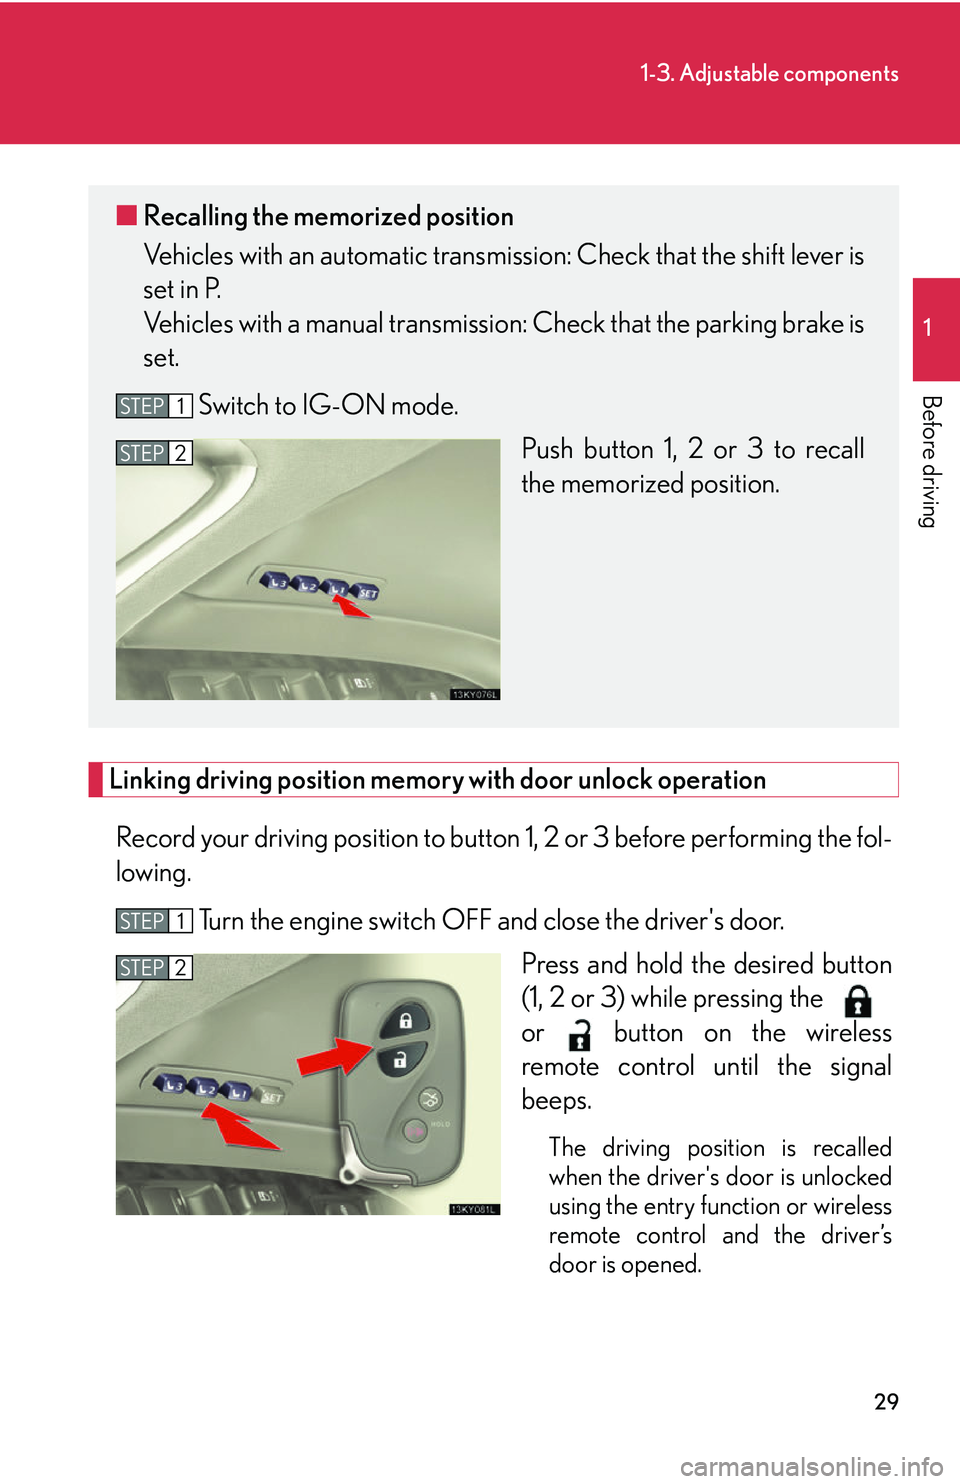 Lexus IS250 2006  Lexus Parking Assist-sensor / LEXUS 2006 IS350/250 FROM MAY 2006 PROD.  (OM53619U) Service Manual 29
1-3. Adjustable components
1
Before driving
Linking driving position memory with door unlock operationRecord your driving position to button  1, 2 or 3 before performing the fol-
lowing. 
Turn the 